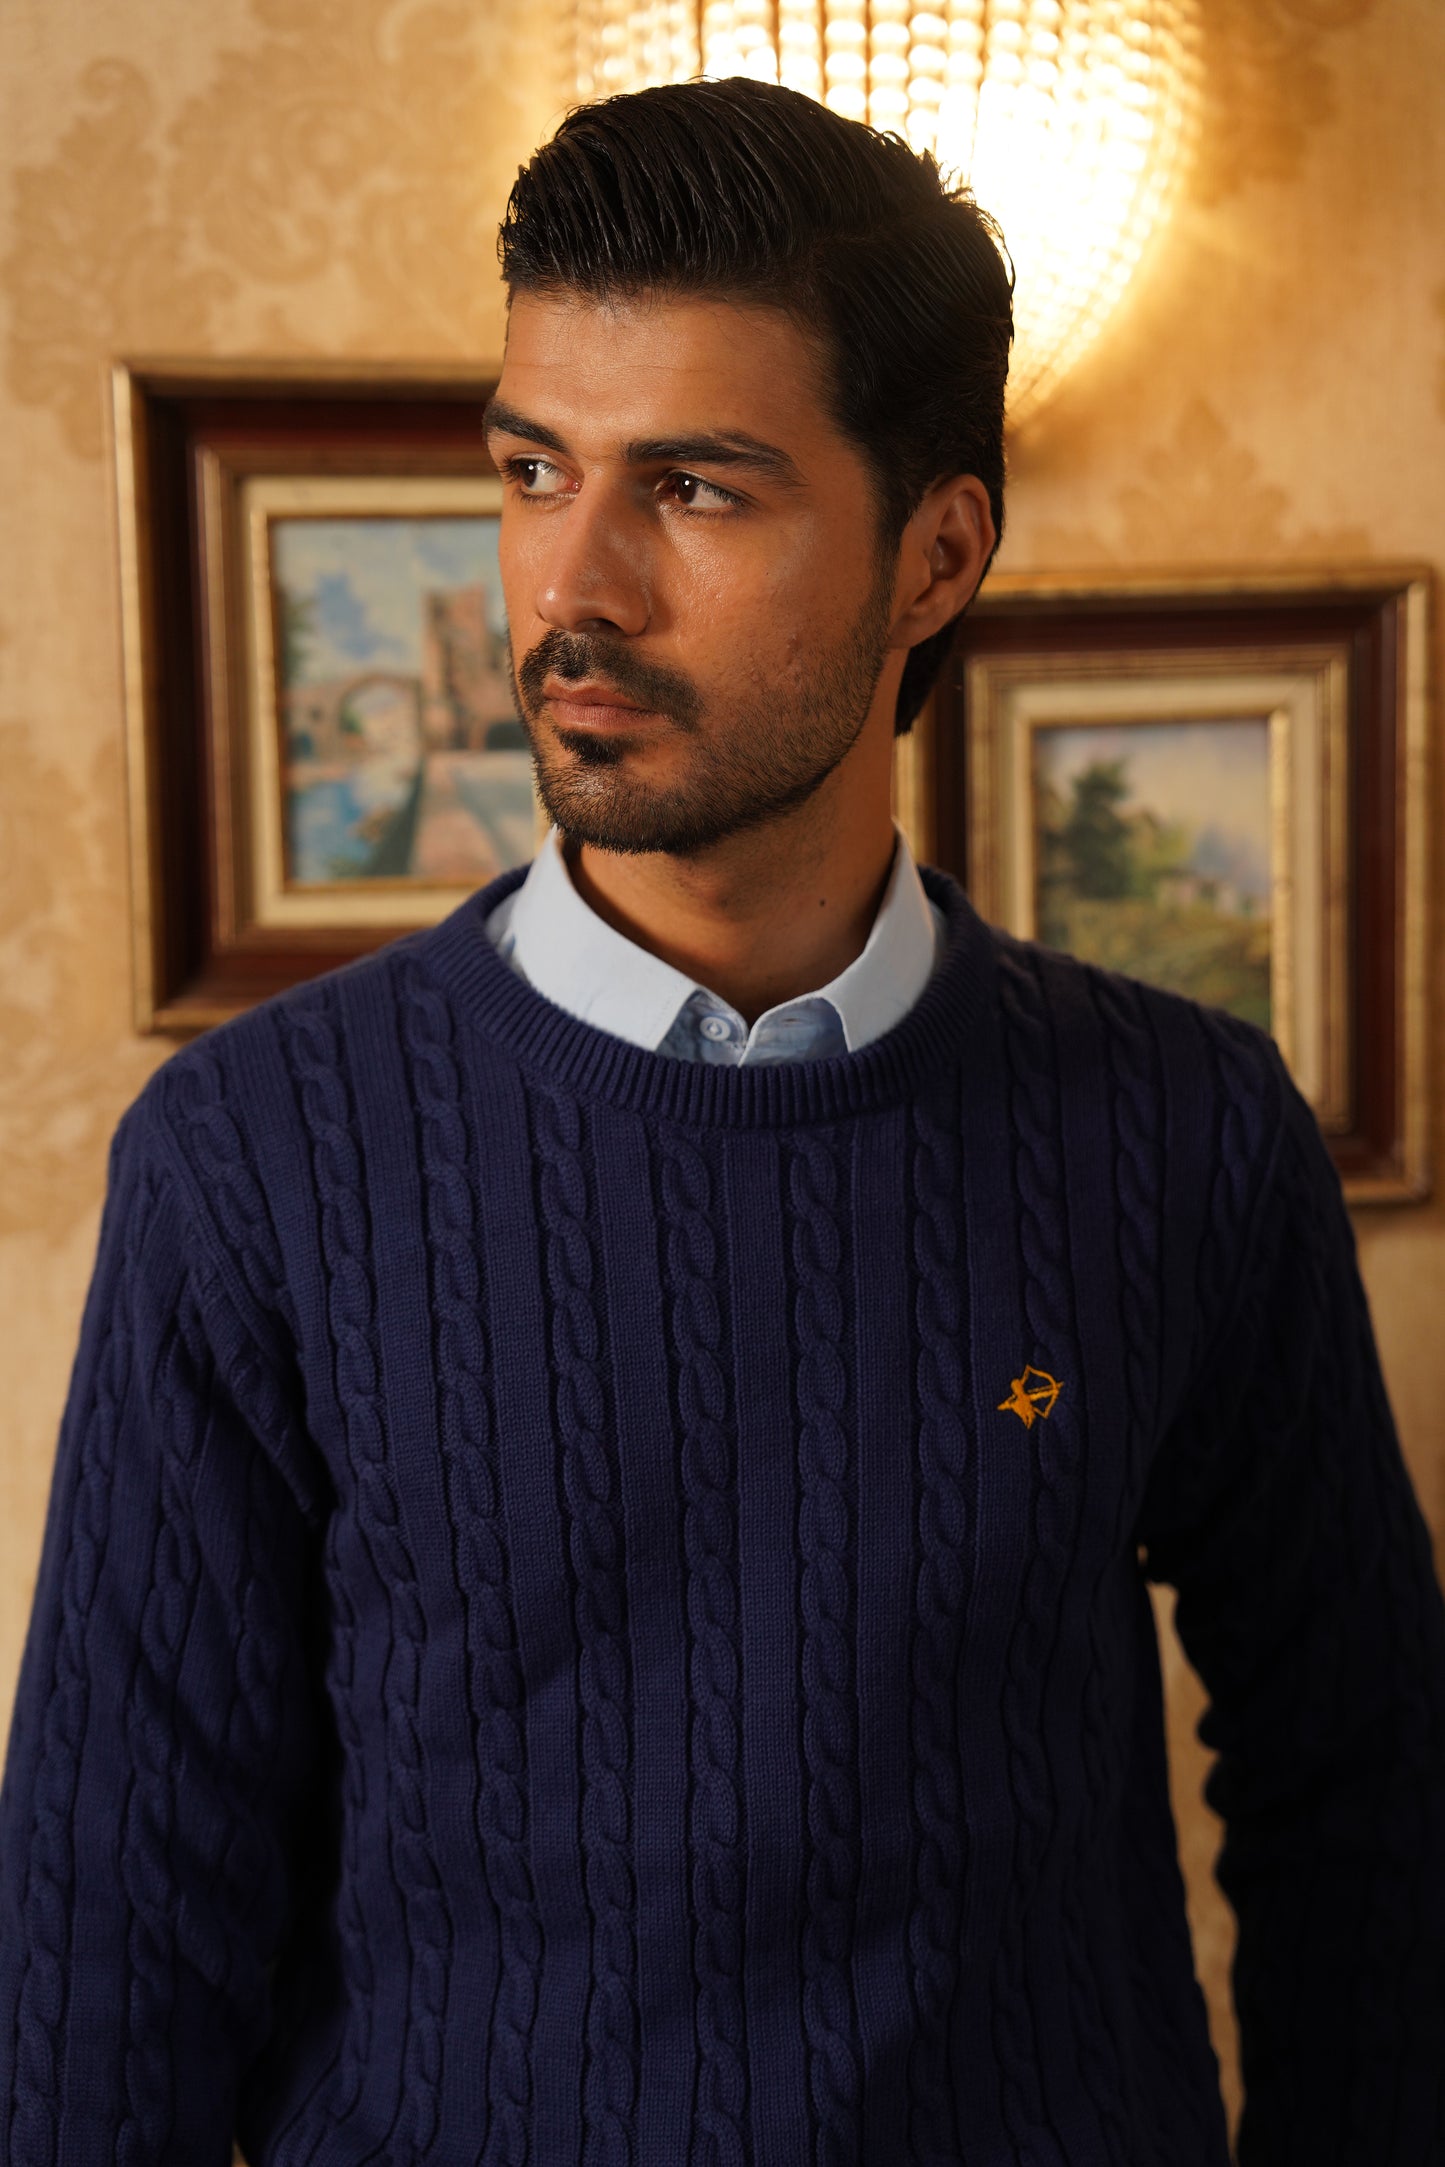 Navy Cable Knit - Wool style sweater